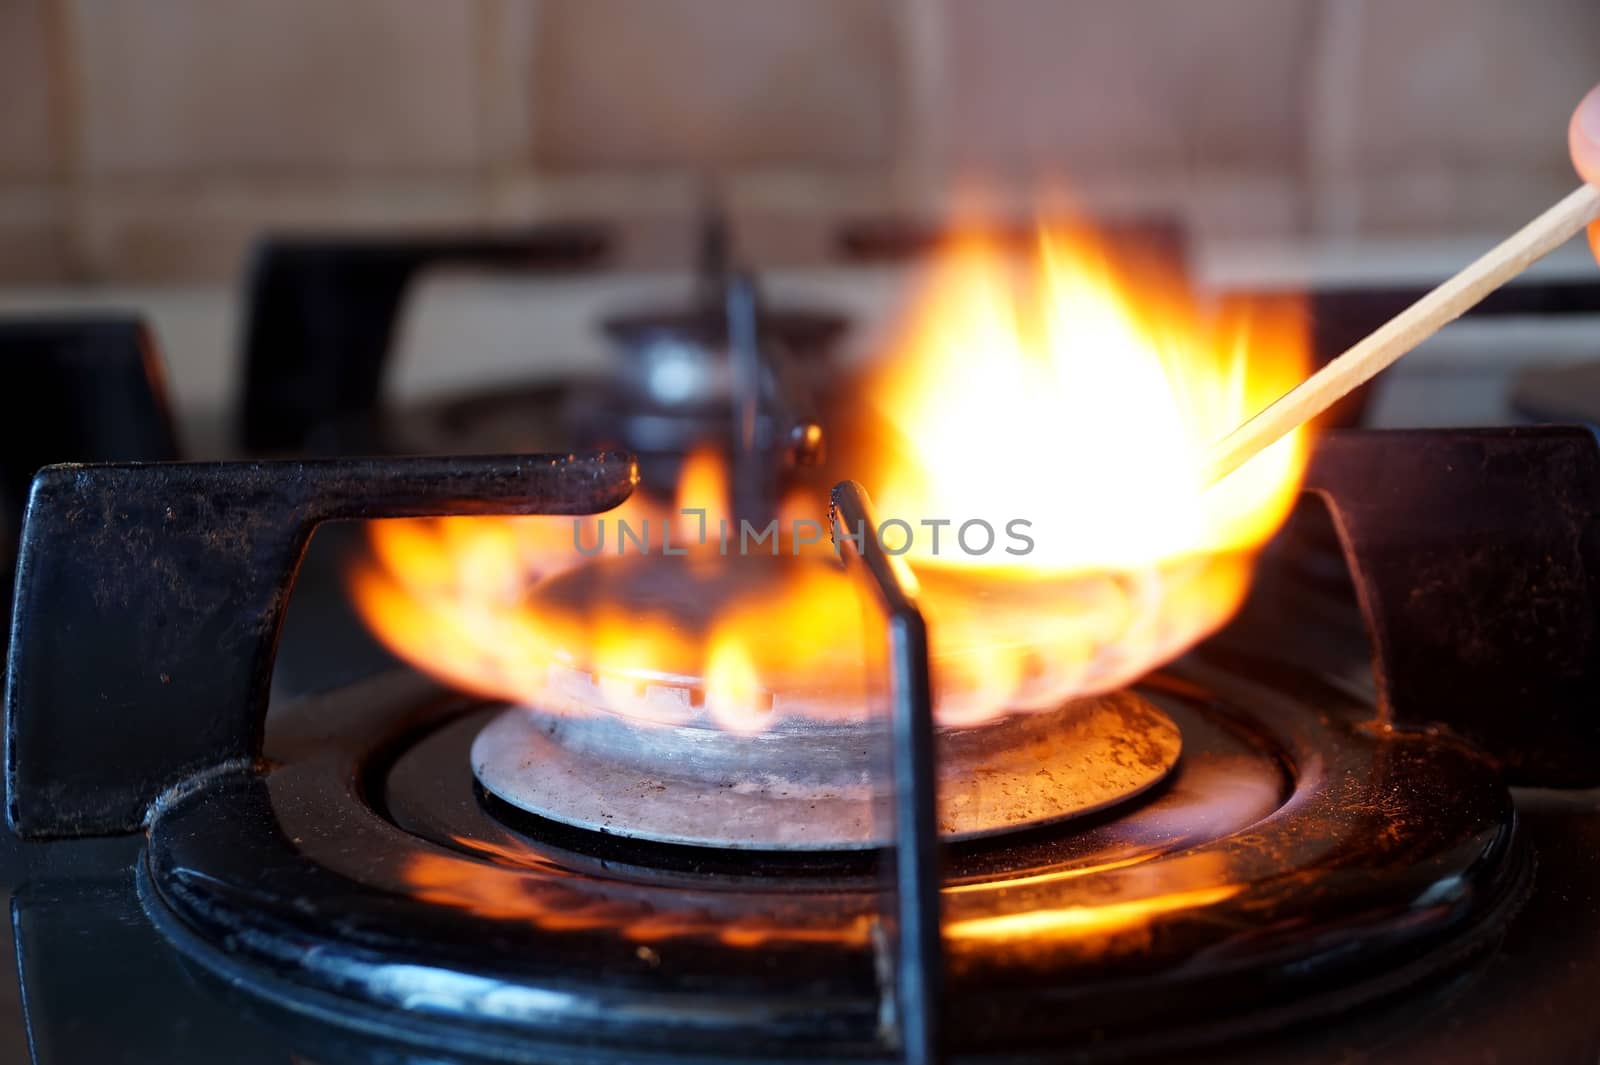 Ignition of a gas ring on the stove by Vadimdem